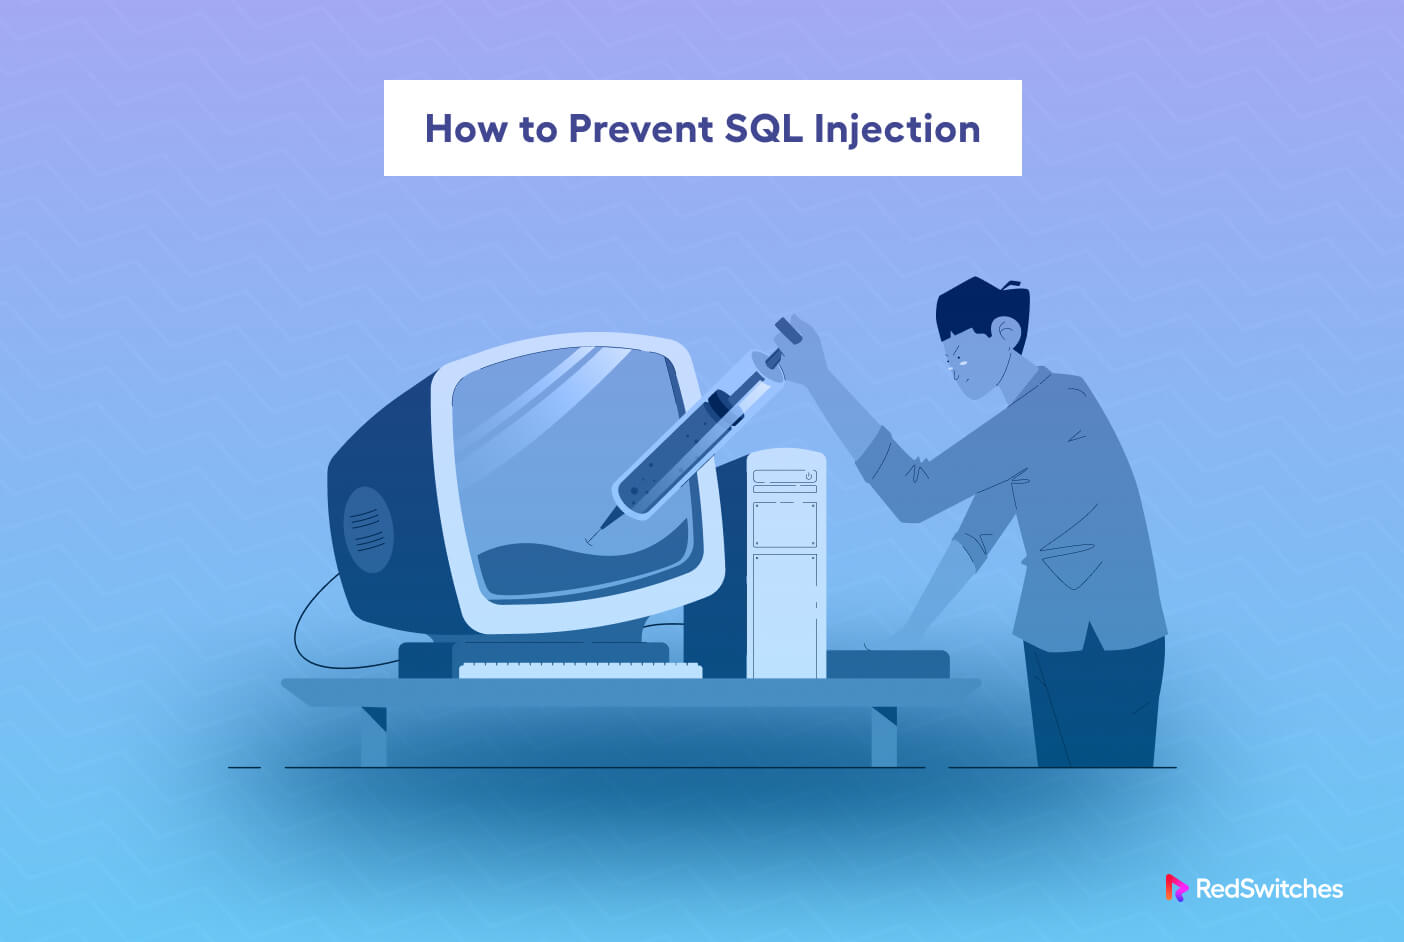 How to Prevent SQL Injection